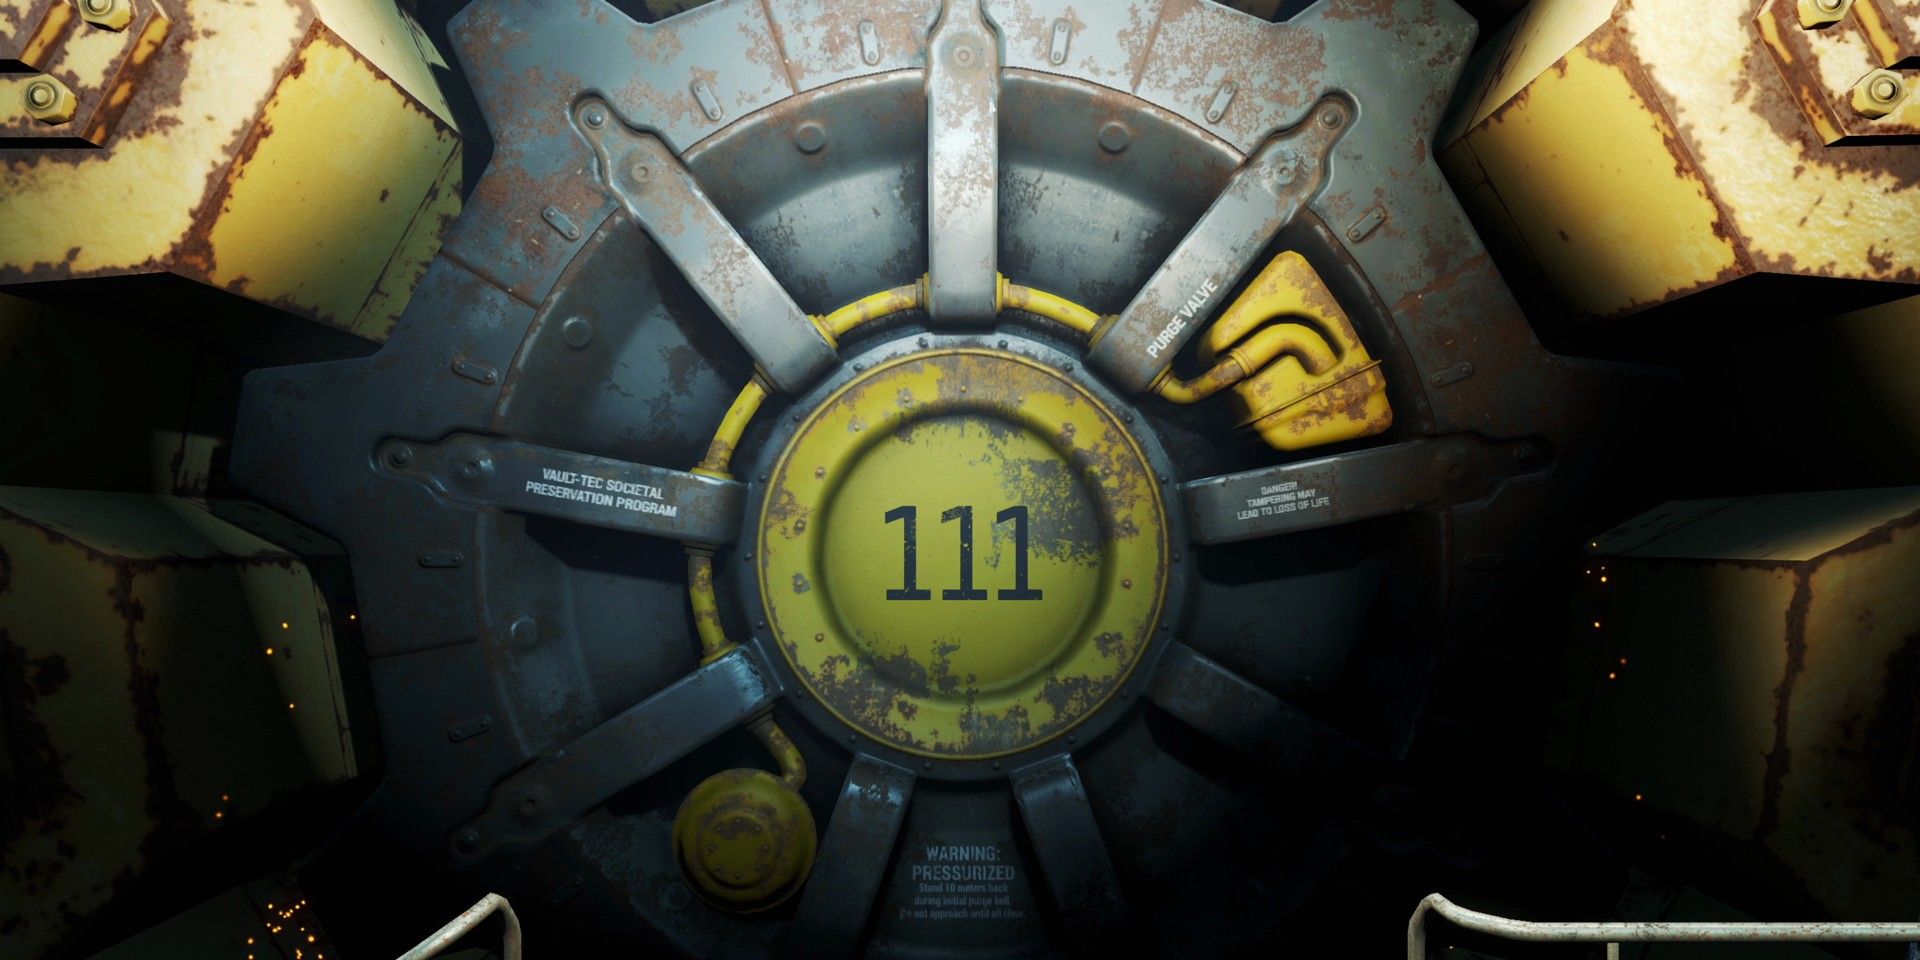 Vault 111 from Fallout 4